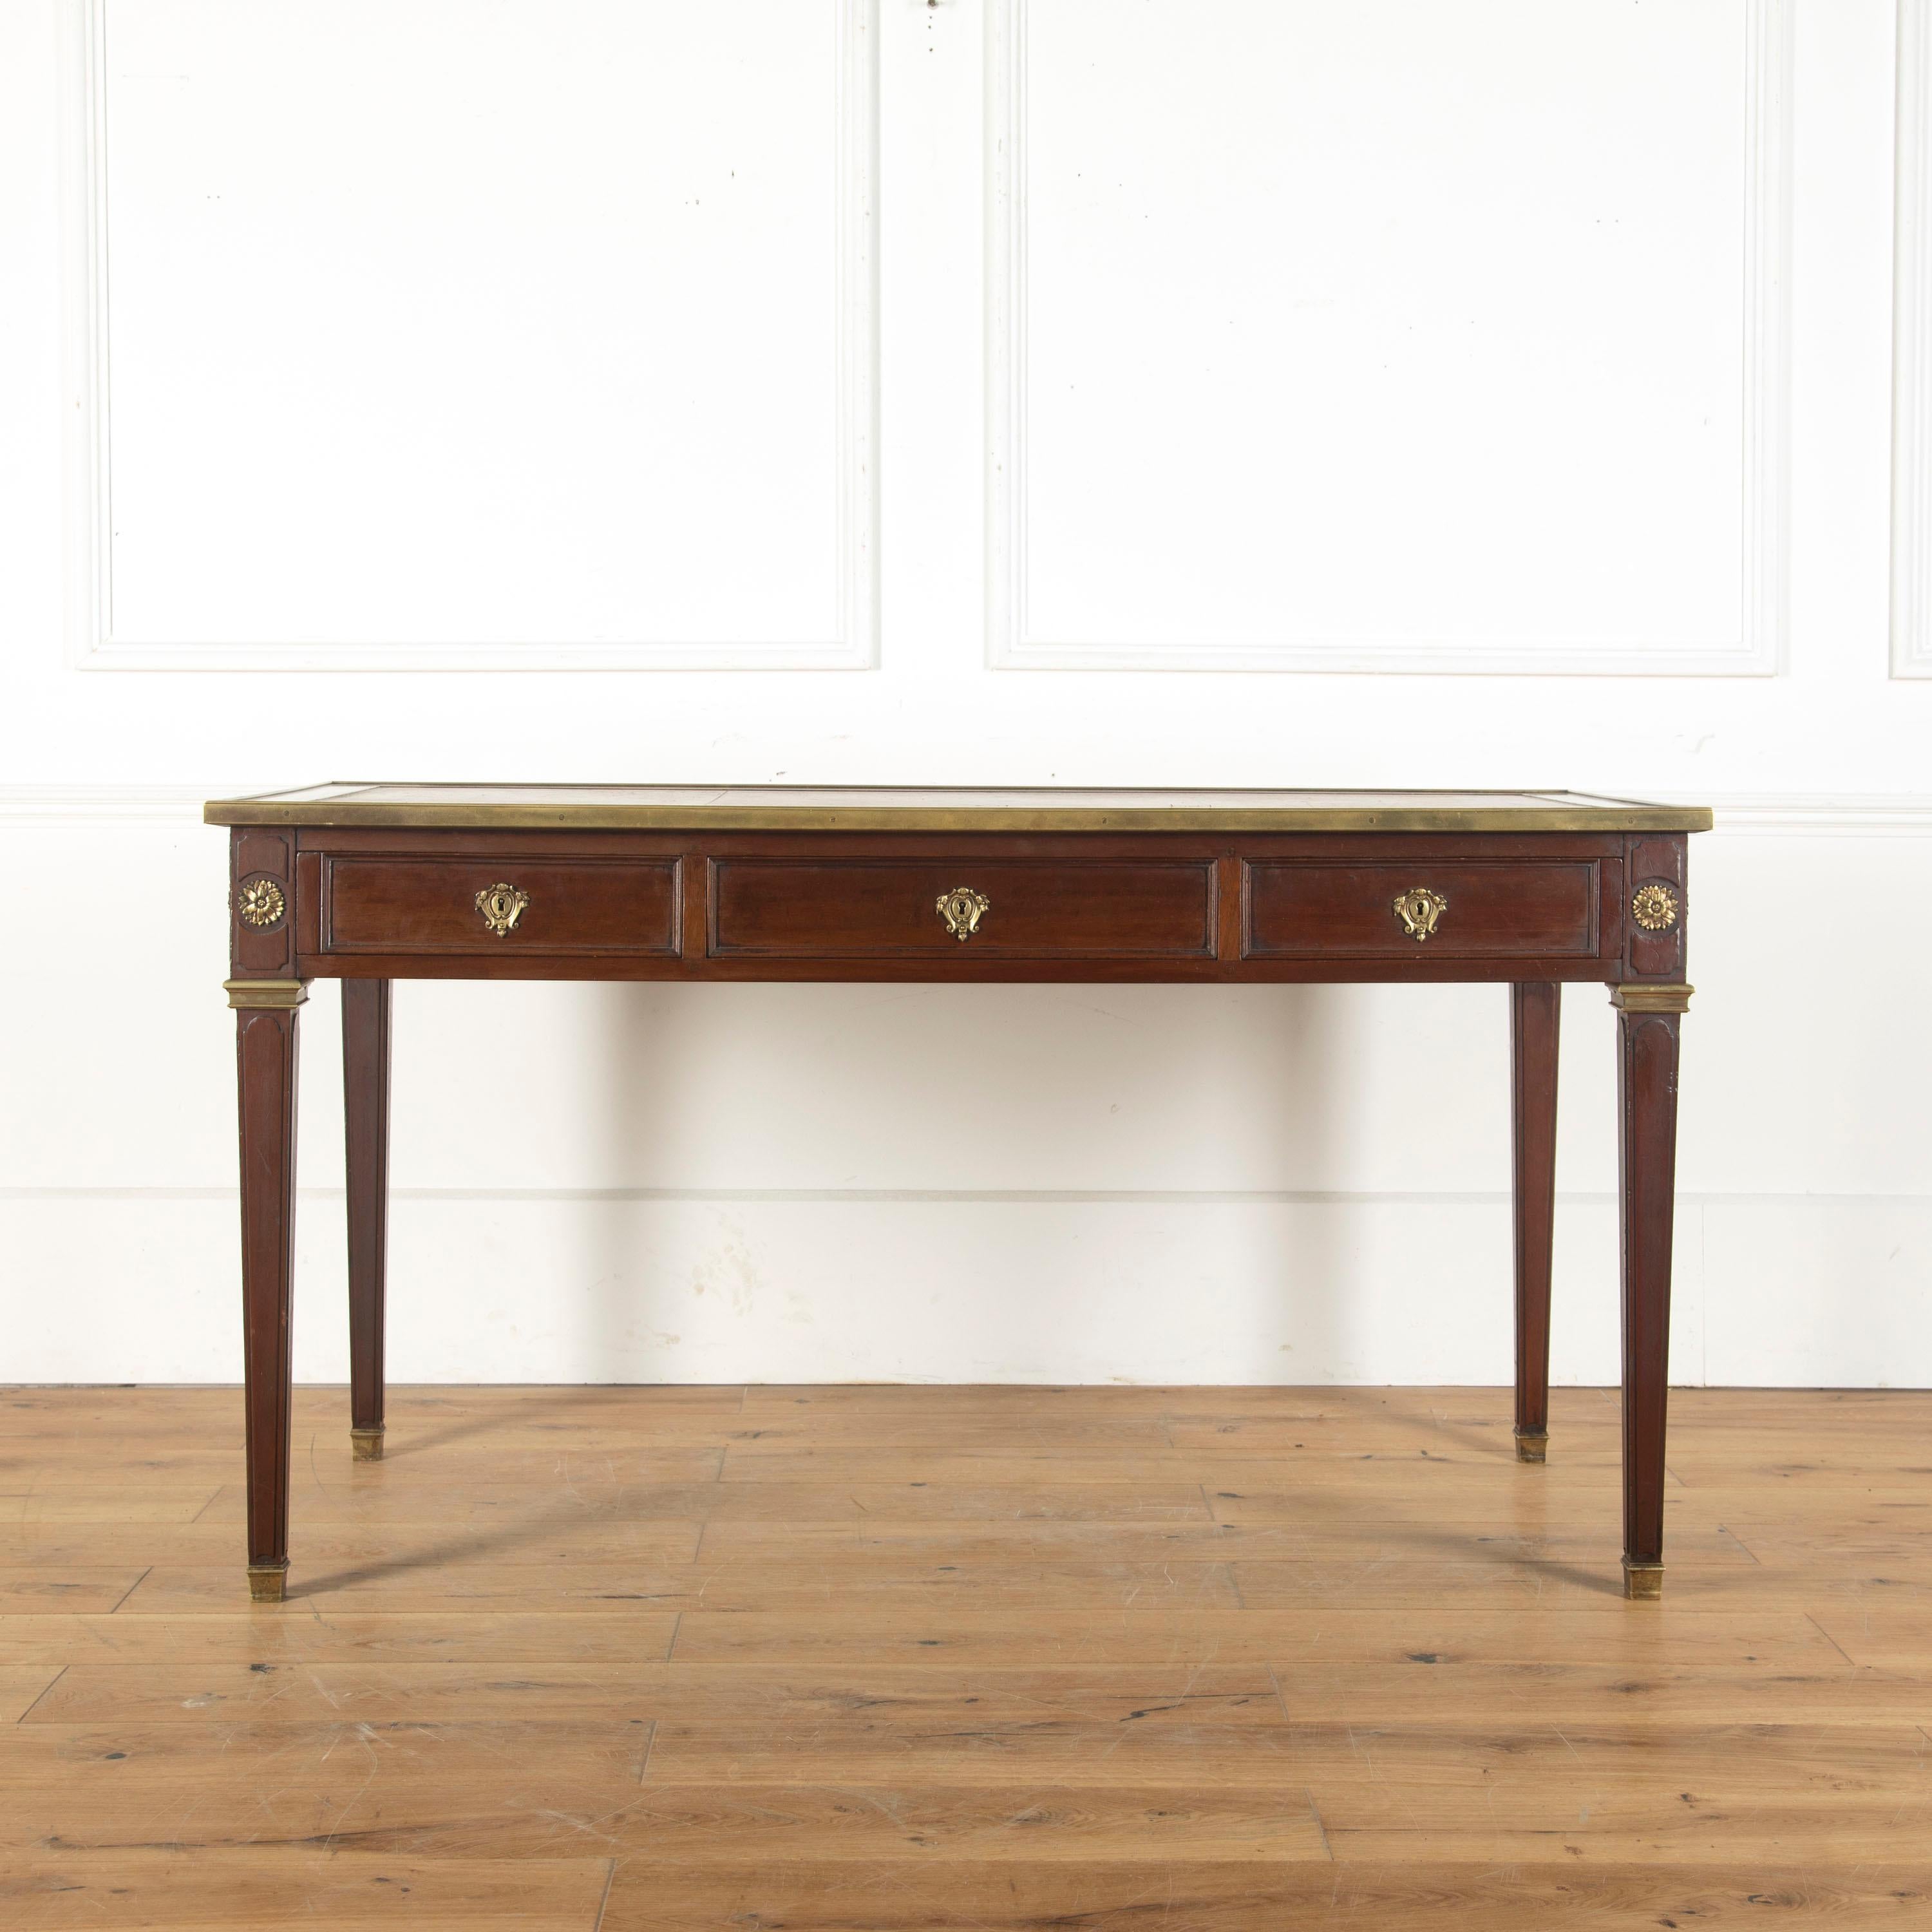 Handsome French mahogany desk in the Louis XVI style, circa 1920.

This beautifully proportioned desk embodies the simple classical lines of French design under Louis XVI. 

Featuring a brass-bound top and lovely high-quality ormolu collars and